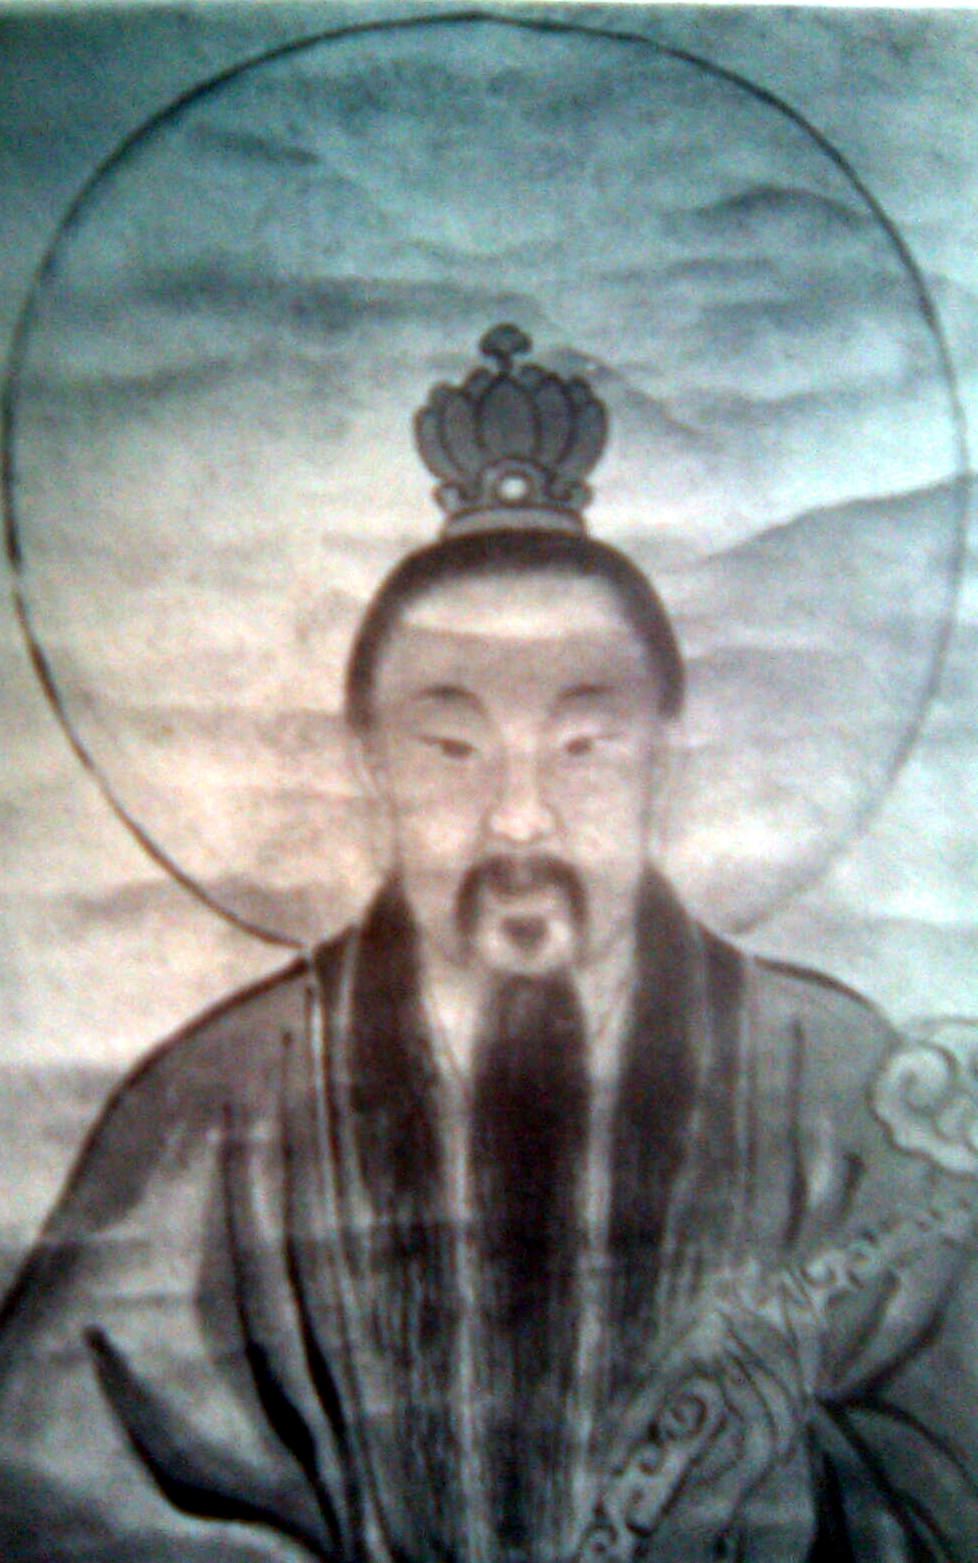 Picture of a painting portraying Laozi